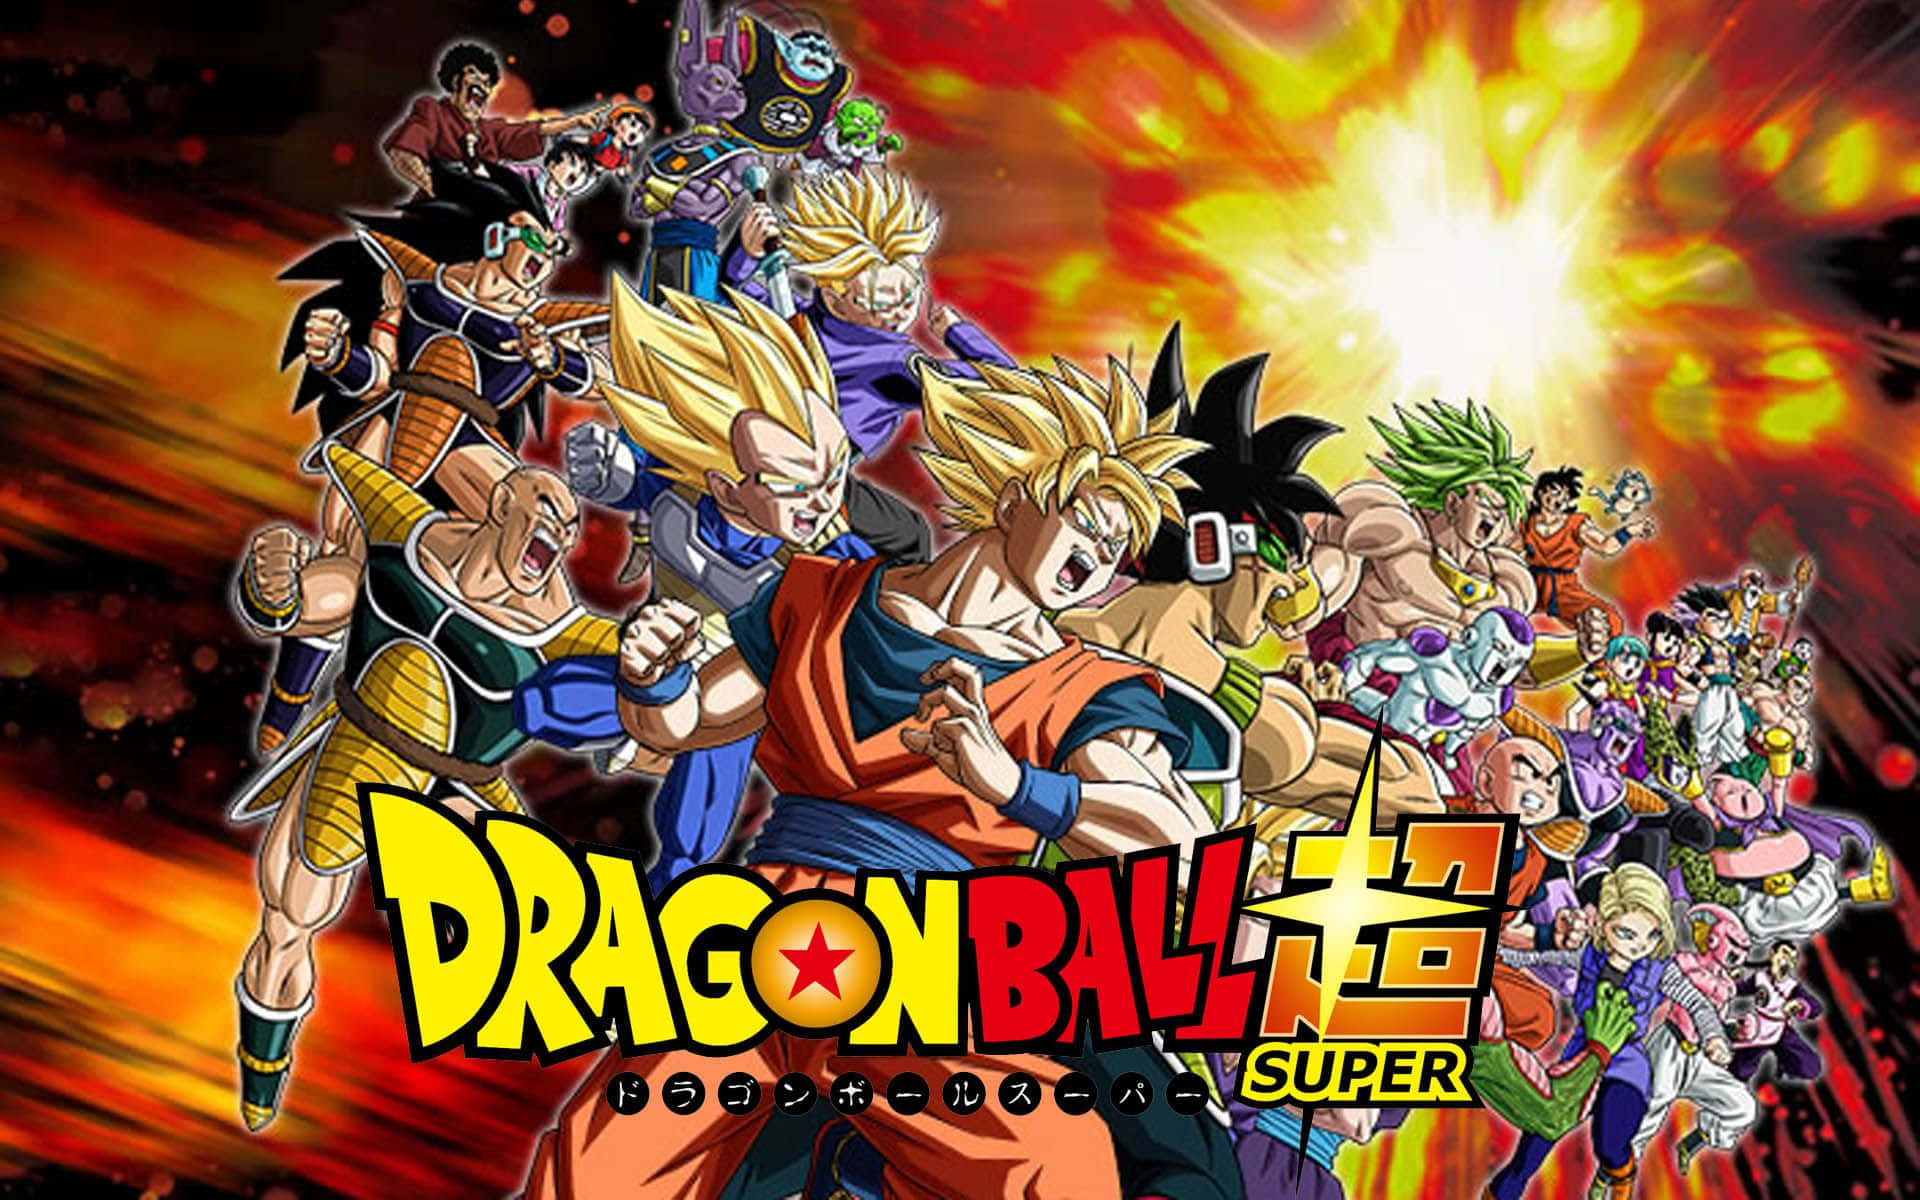 Download Stay in the fight with this awesome Dragon Ball wallpaper